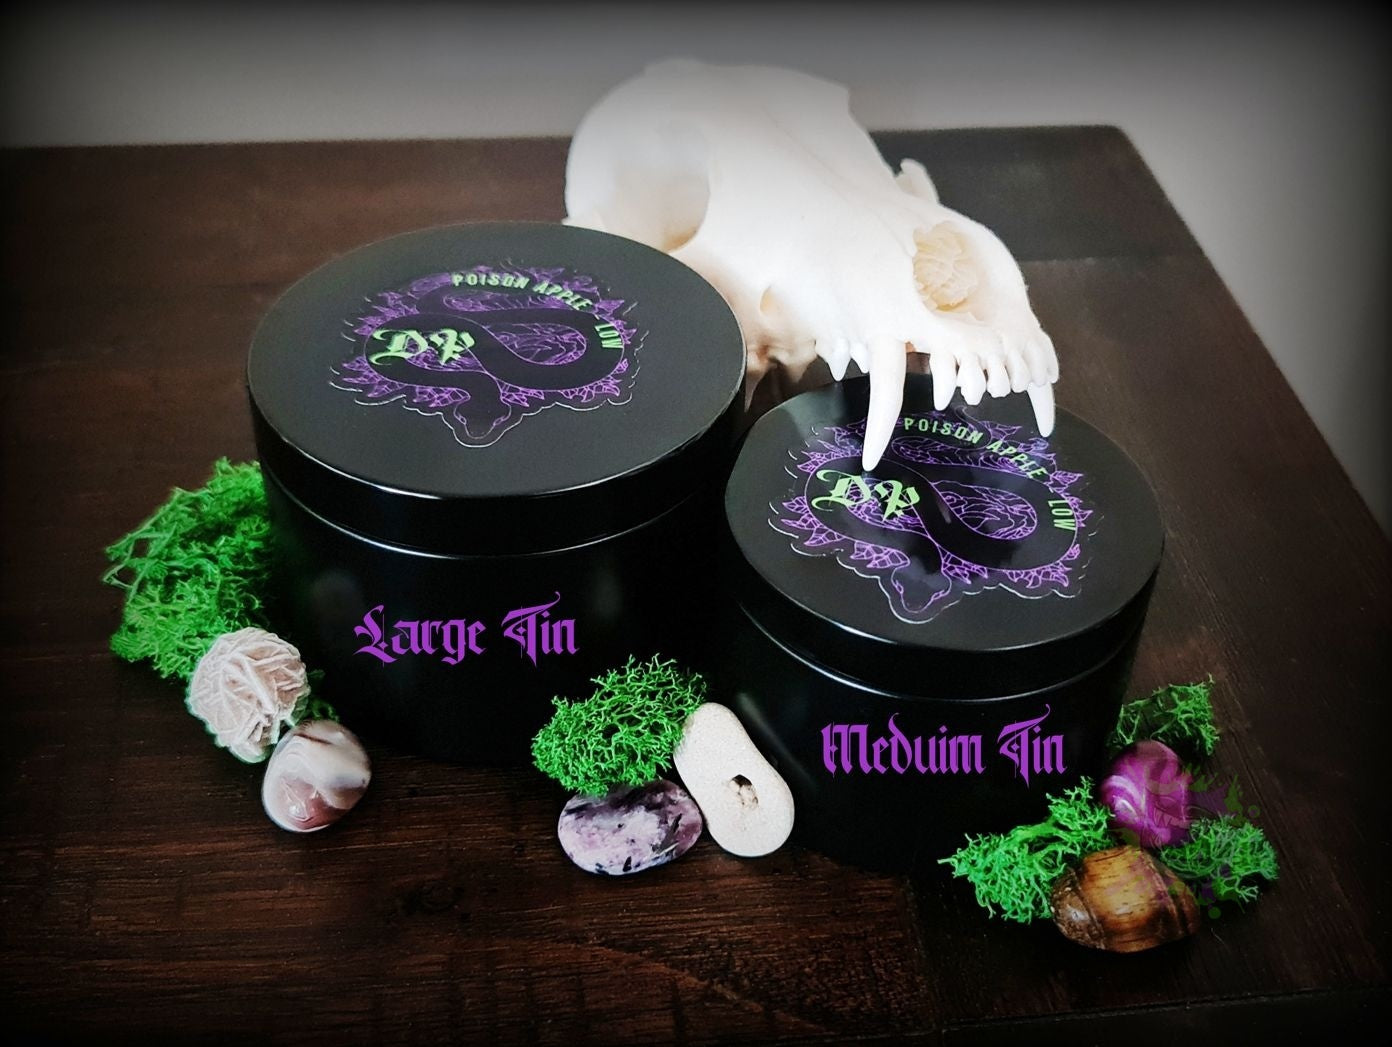 'Lilith' Wax Play Candle darque-path